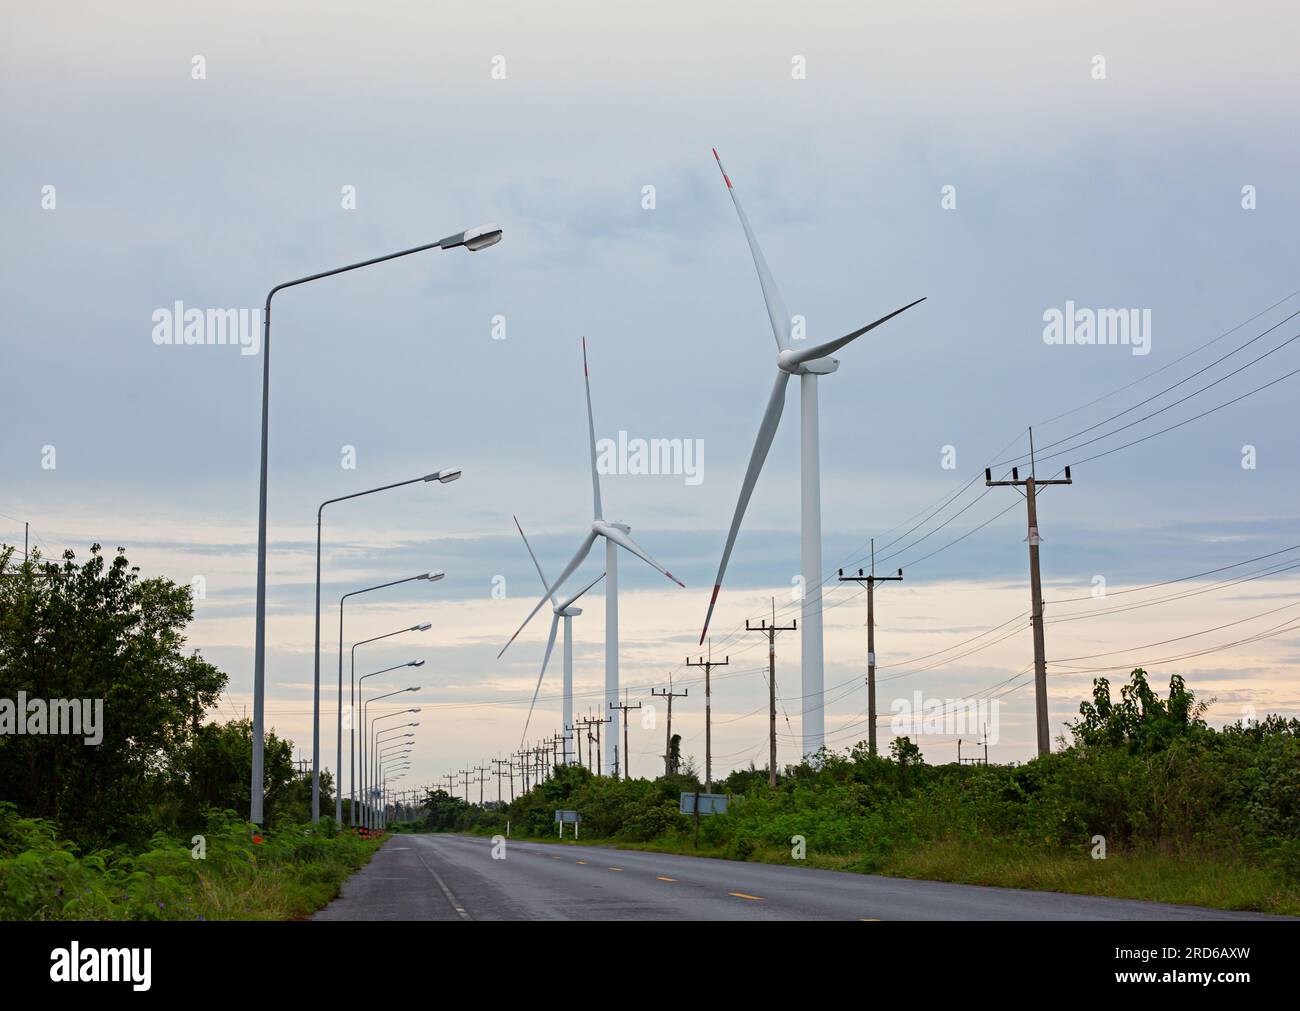 Asphalt road beside the road with electricity poles and wind turbines. Stock Photo